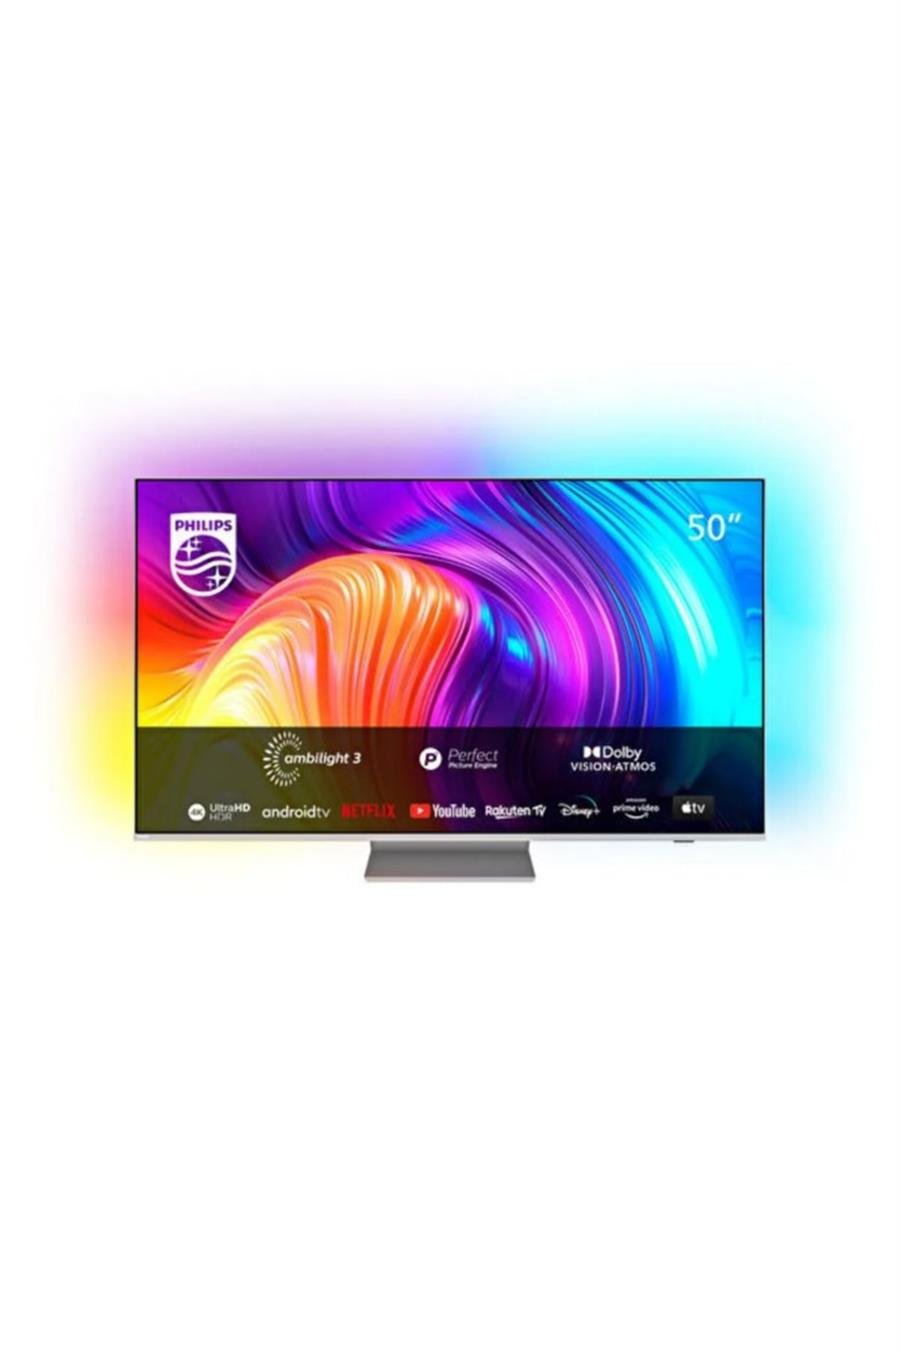 PHILIPS 50 PUS 8807 126 EKRAN- 4K- HDR - ANDROID T